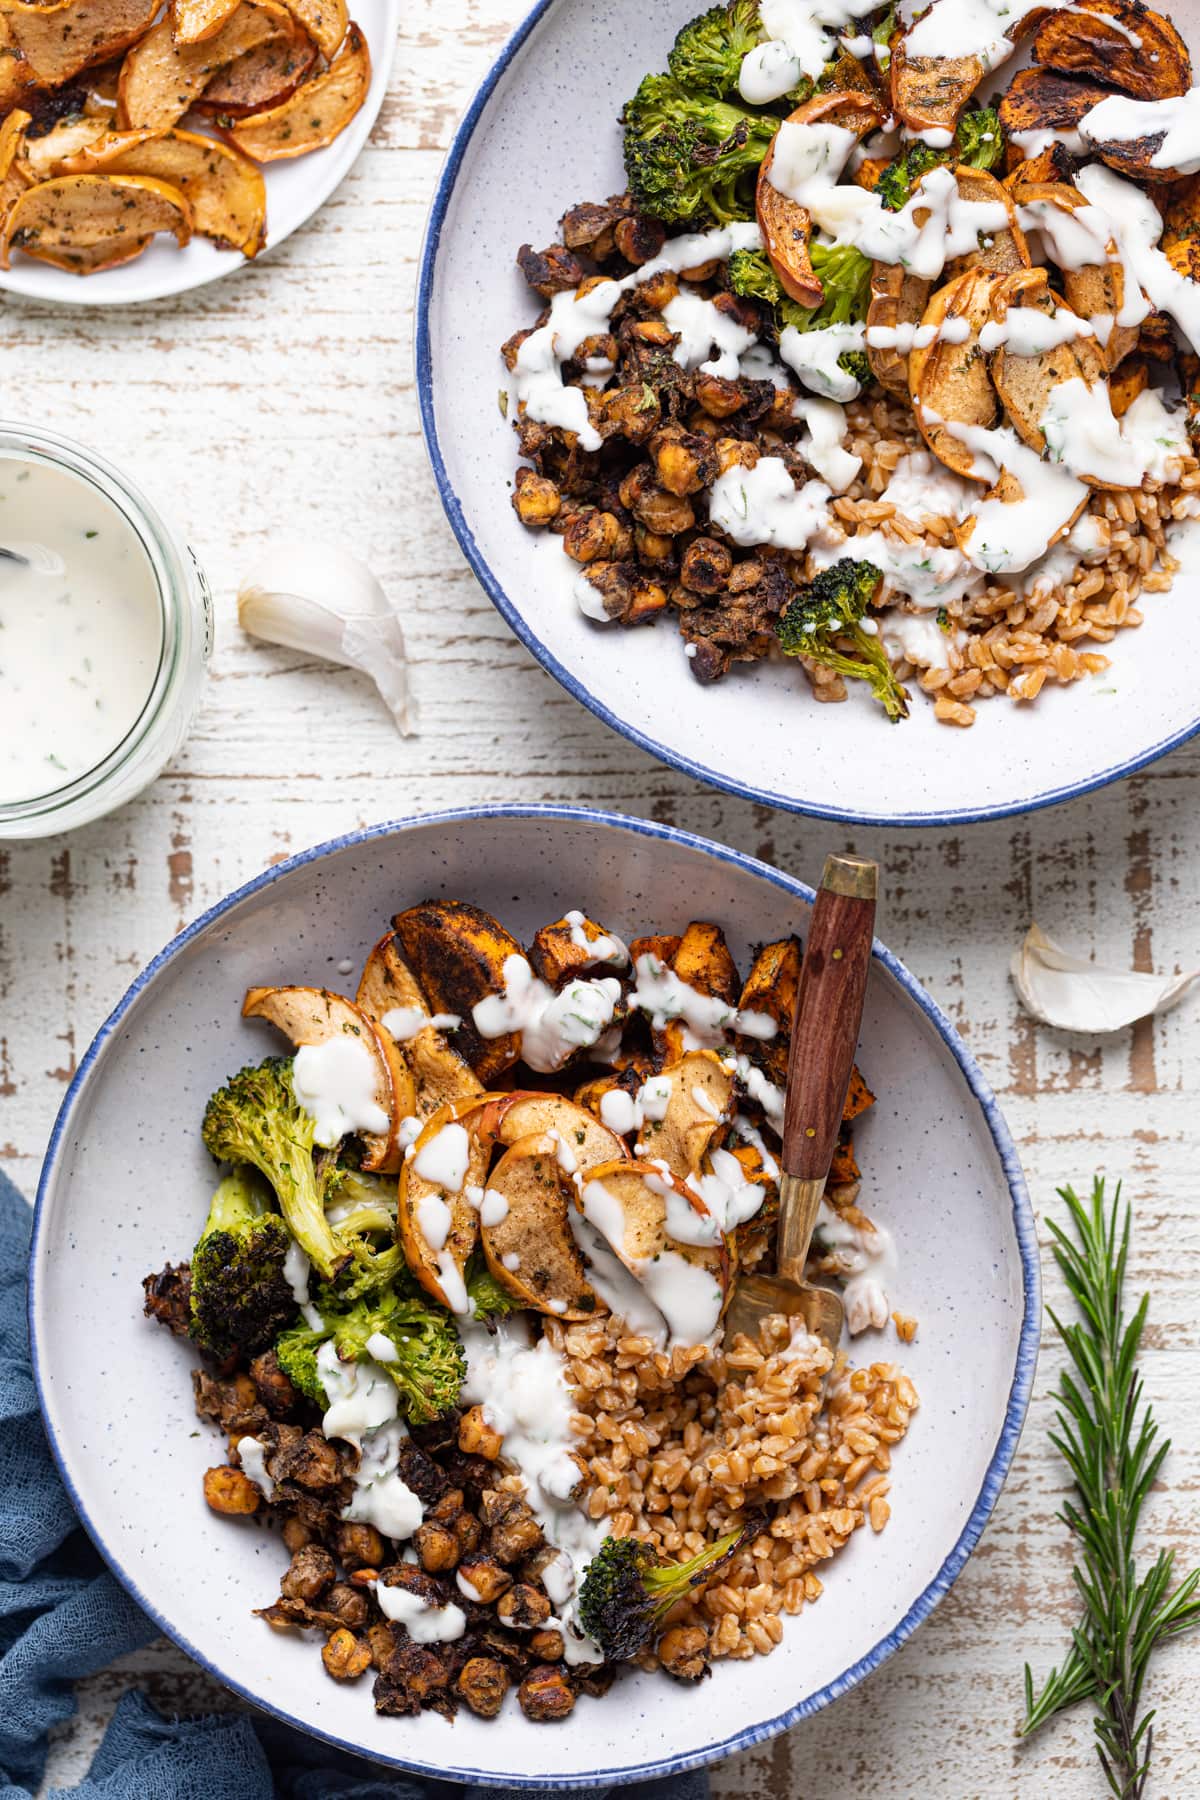 Two Jerk Vegetable Farro Bowls drizzled with dairy-free garlic dressing